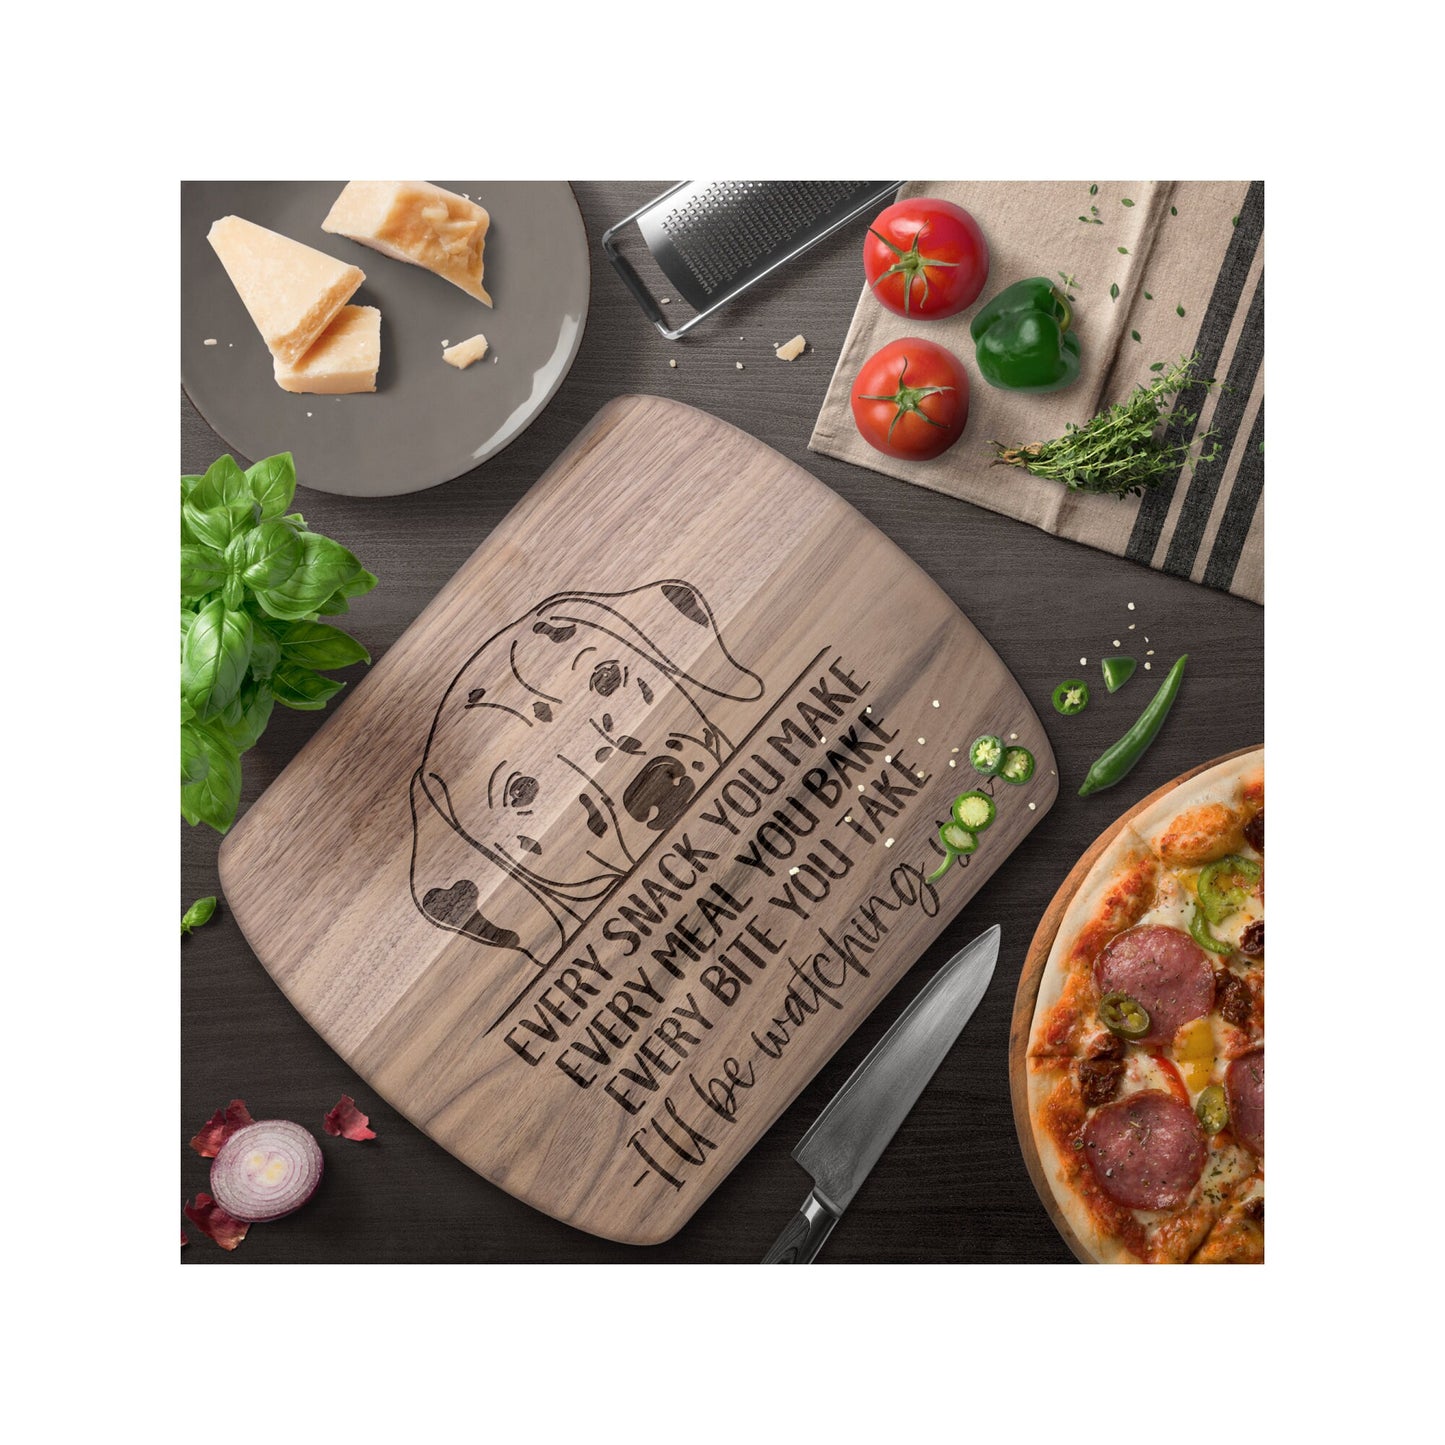 Dalmatian Snack Funny Cutting Board for Dog Mom, Dog Lover Wood Serving Board, Dog Dad Charcuterie Board, Wooden Chopping Board Gift for Him